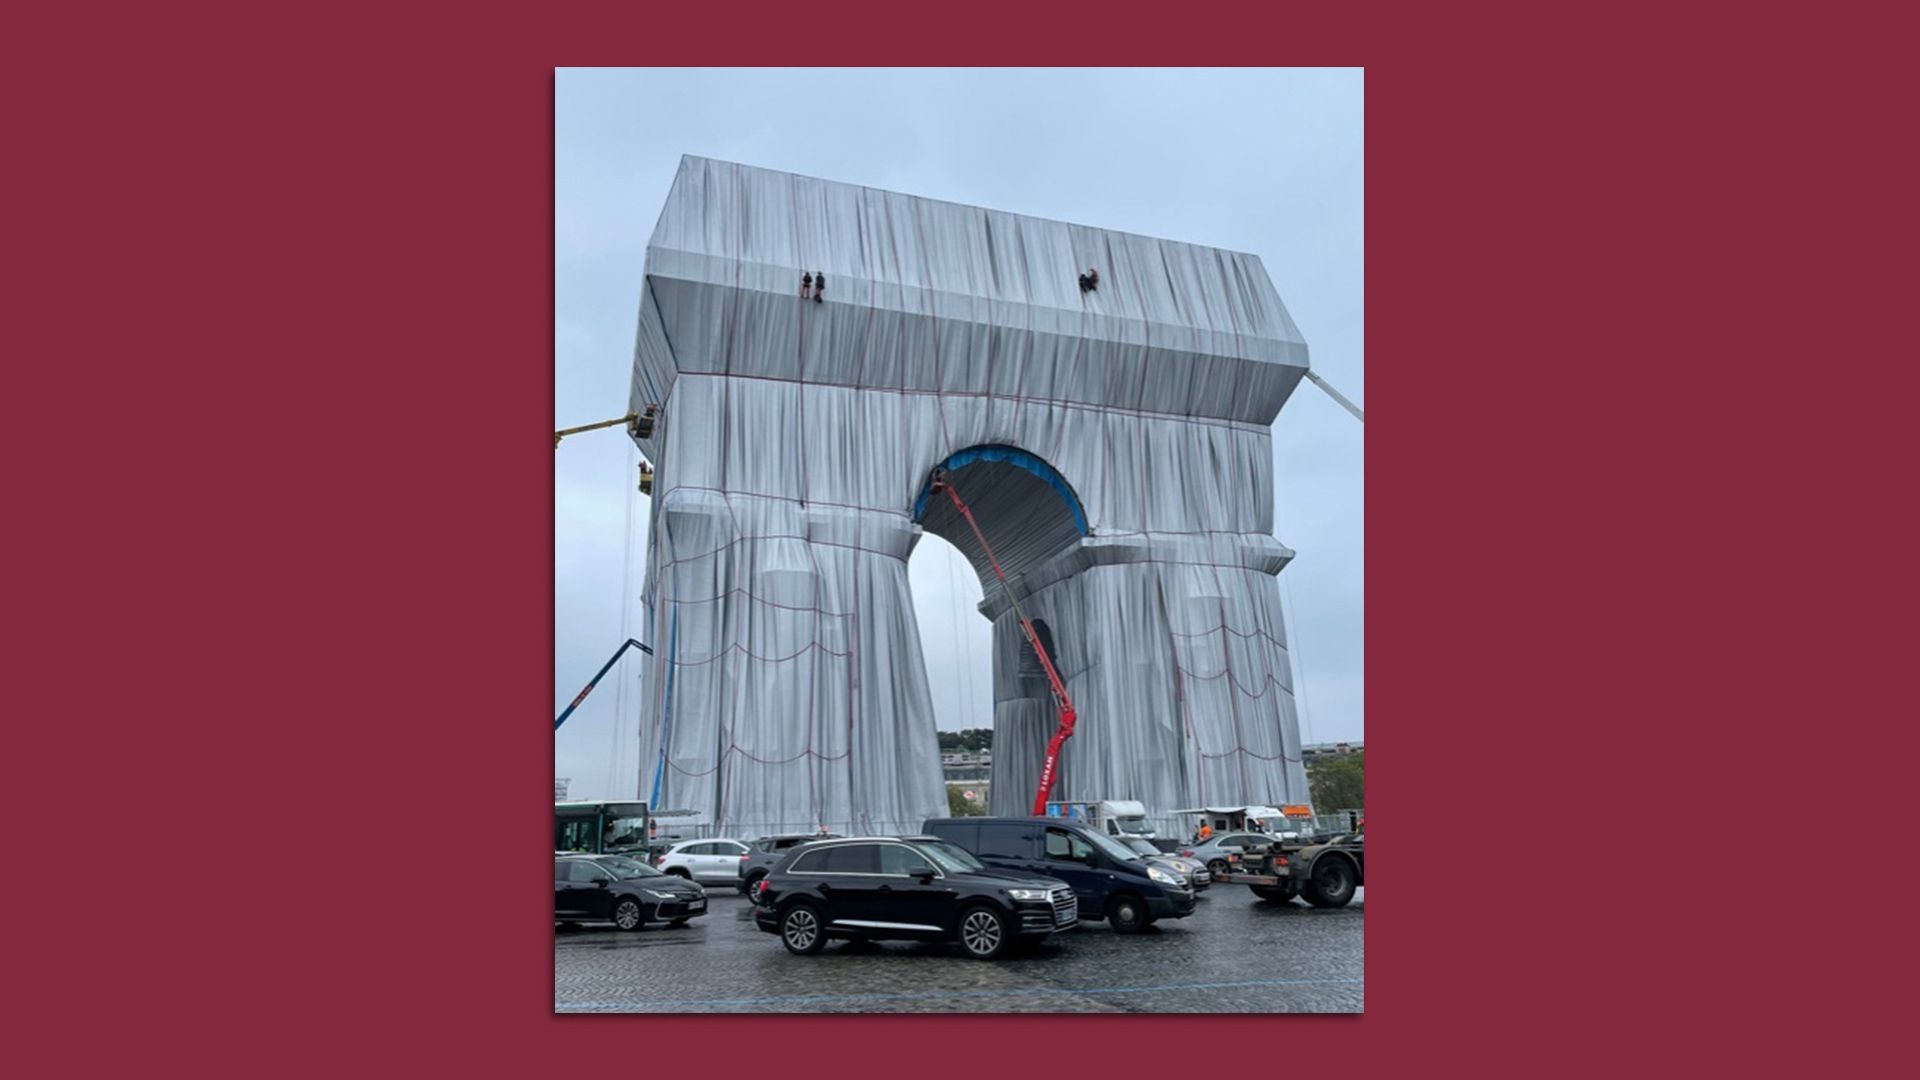 L'Arc de Triomphe in Paris as wrapped in the style of the late Christo